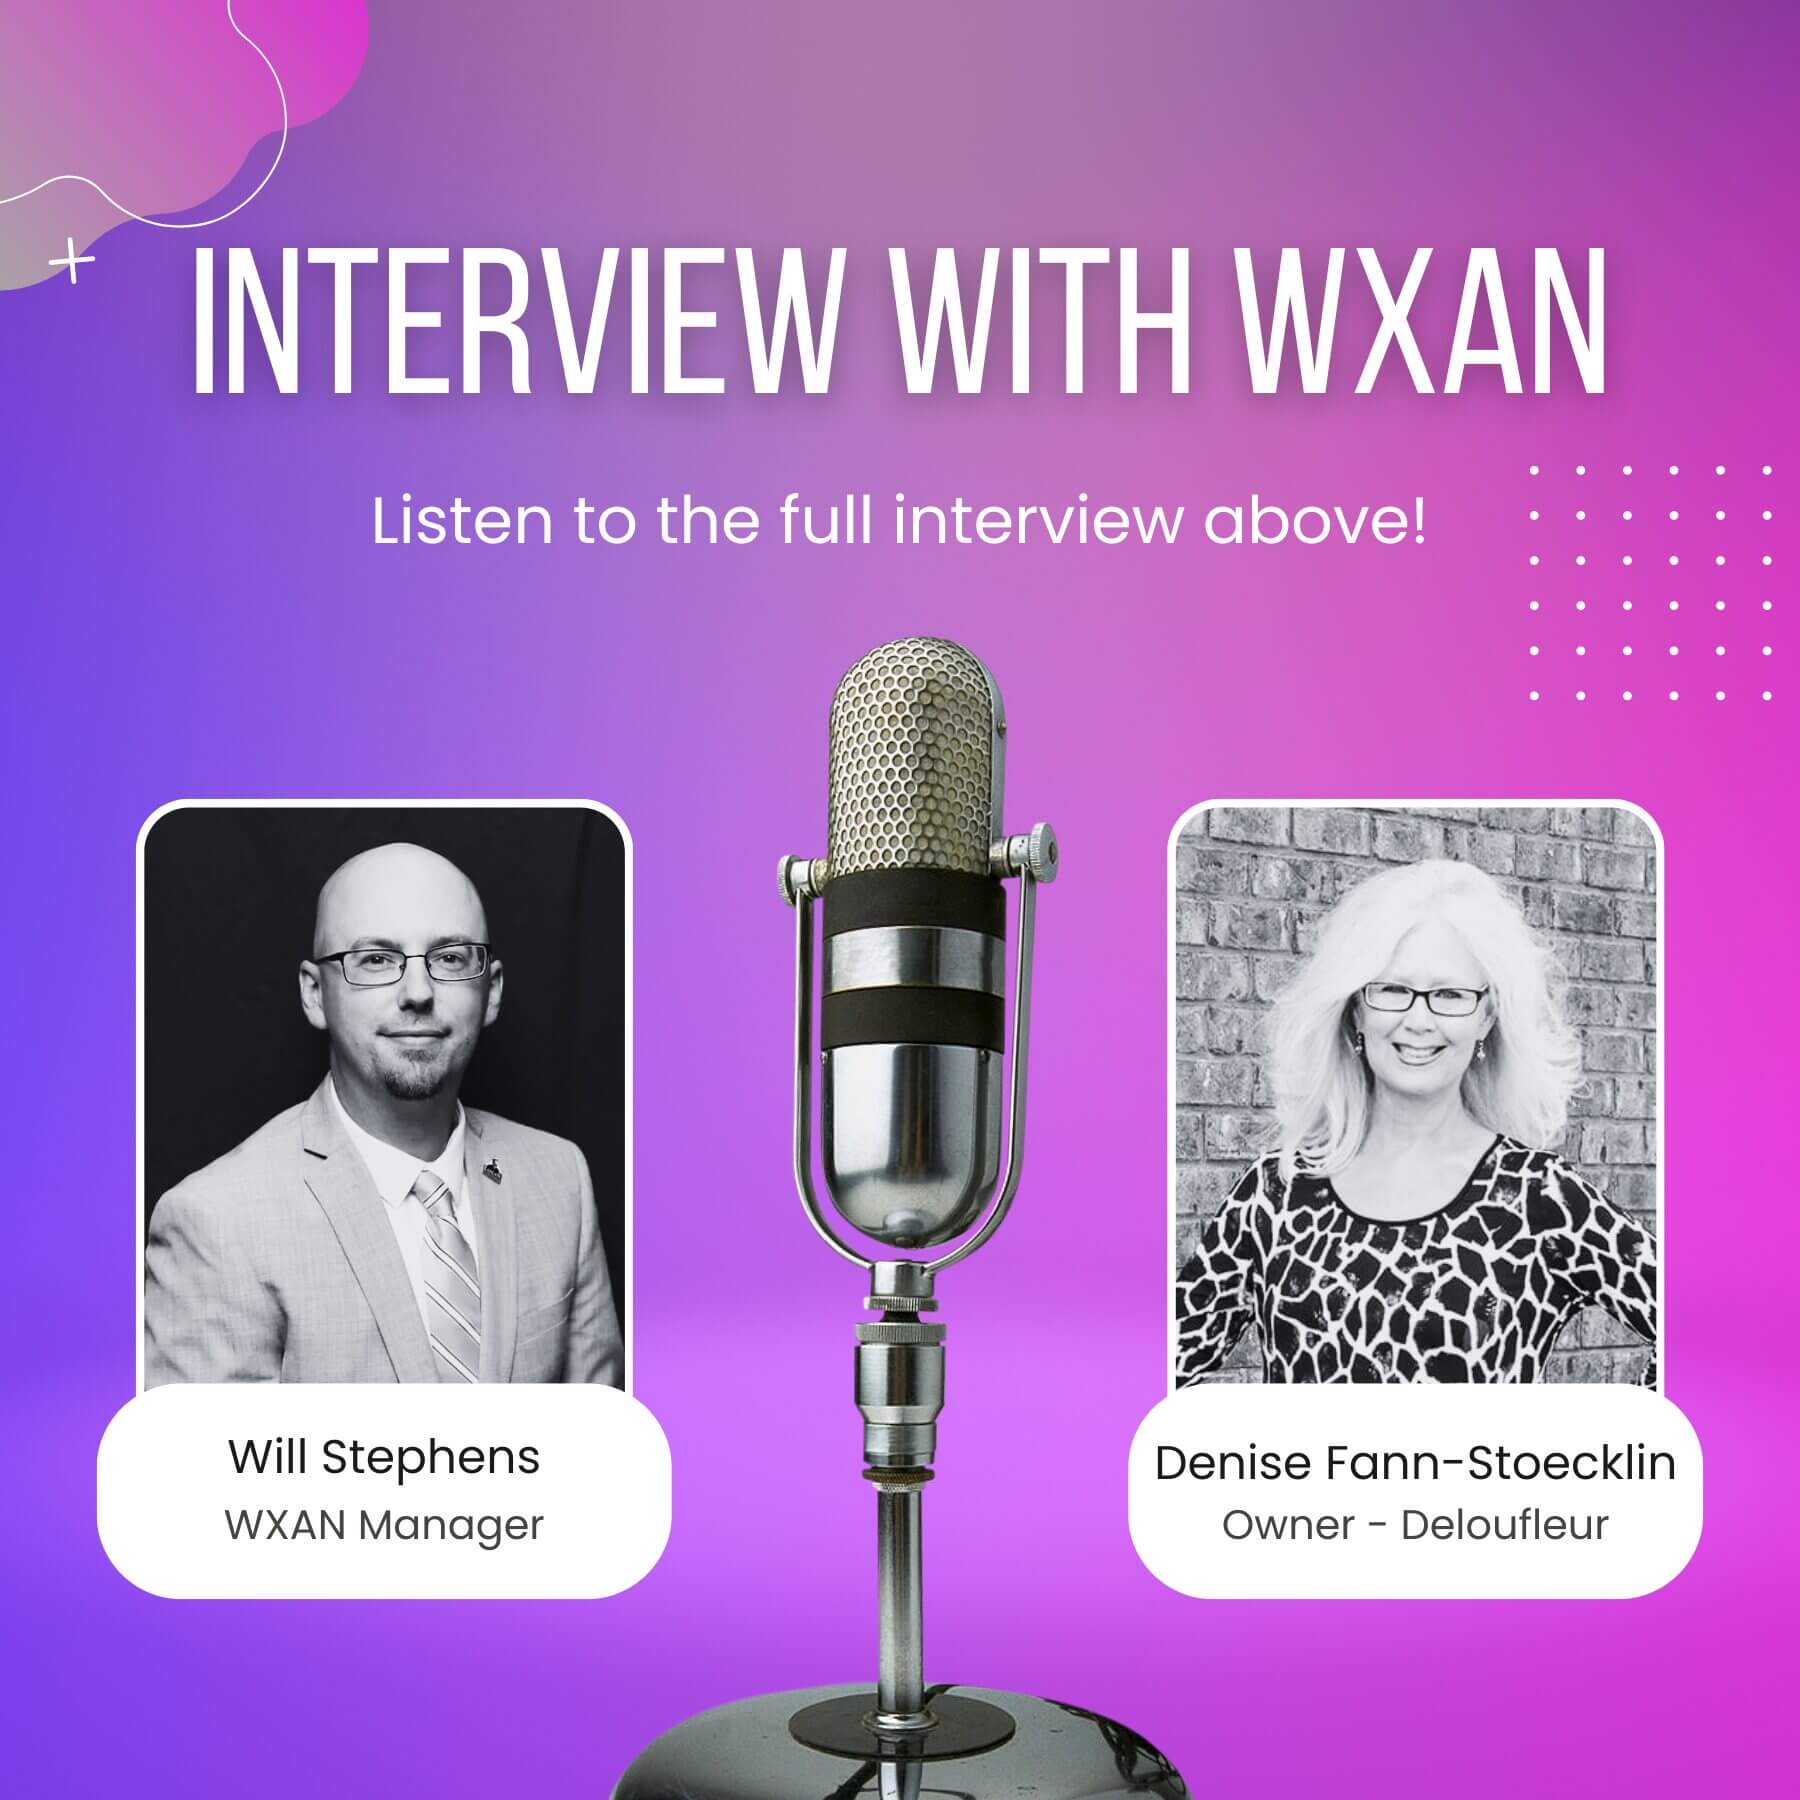 Interview With Wxan(1)